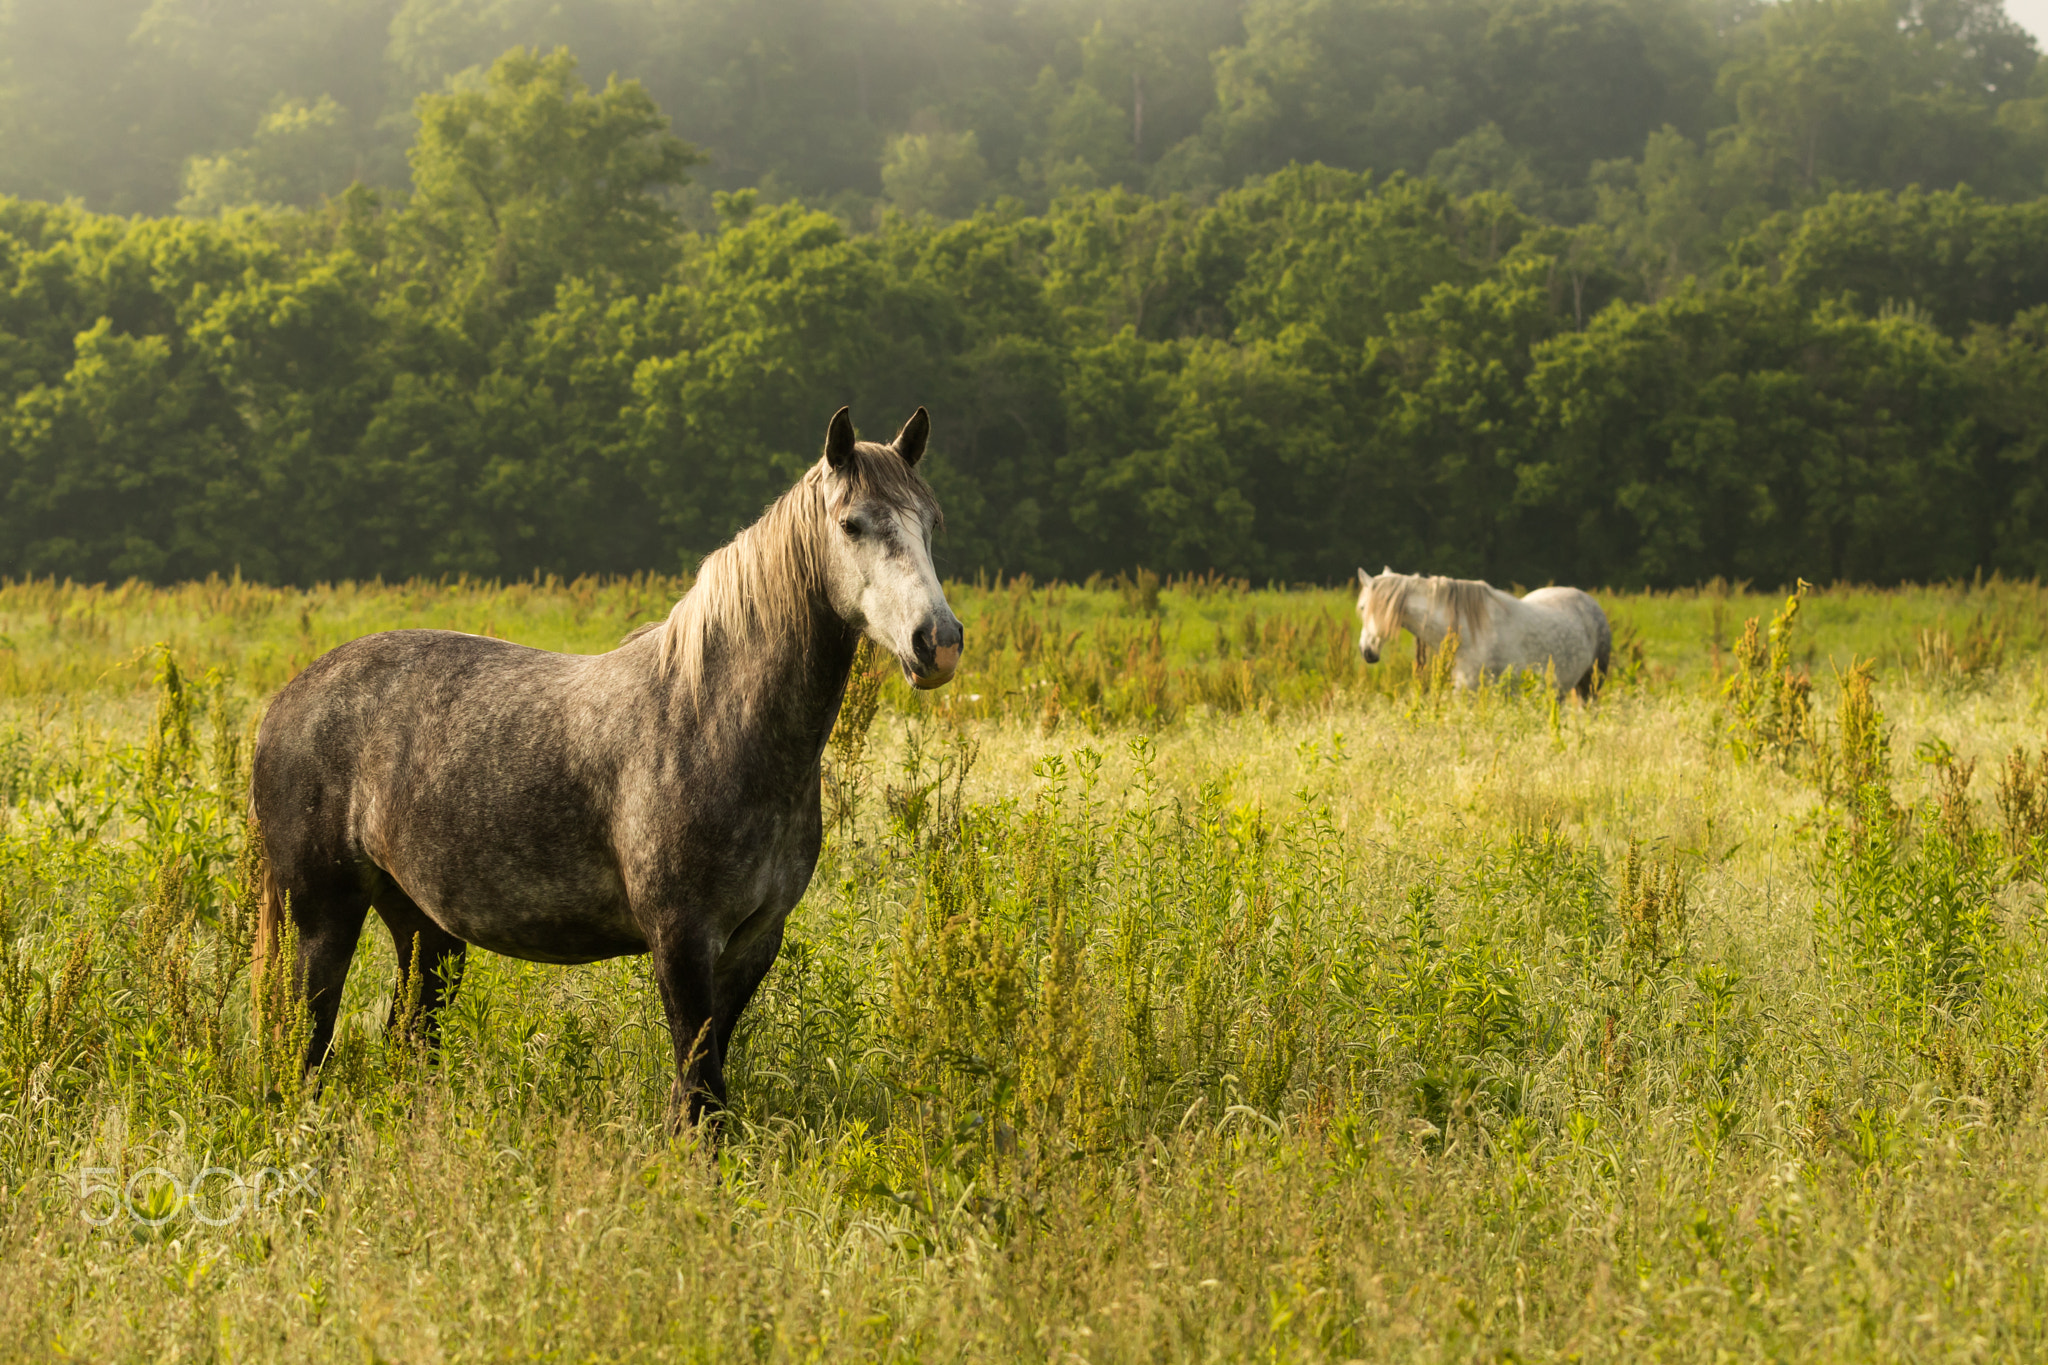 Wild Horses Out in the Field